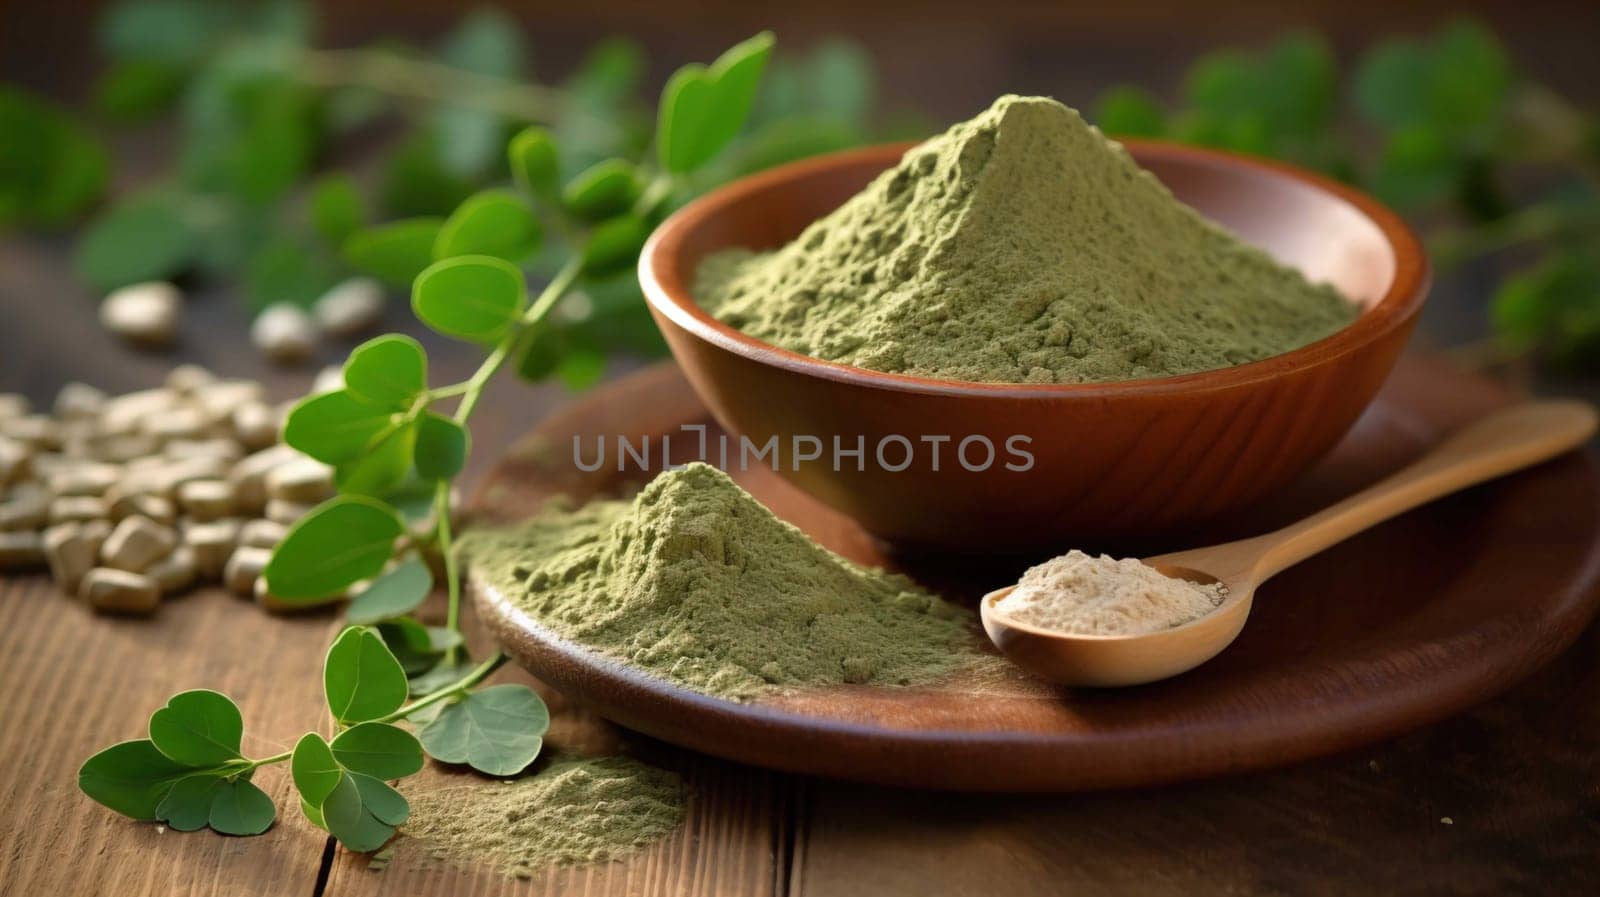  , Moringa oliefera herb leaves, oil and powder Used to treat anemia, rheumatism, cancer, diarrhea, diabetes , Generate AI by Mrsongrphc